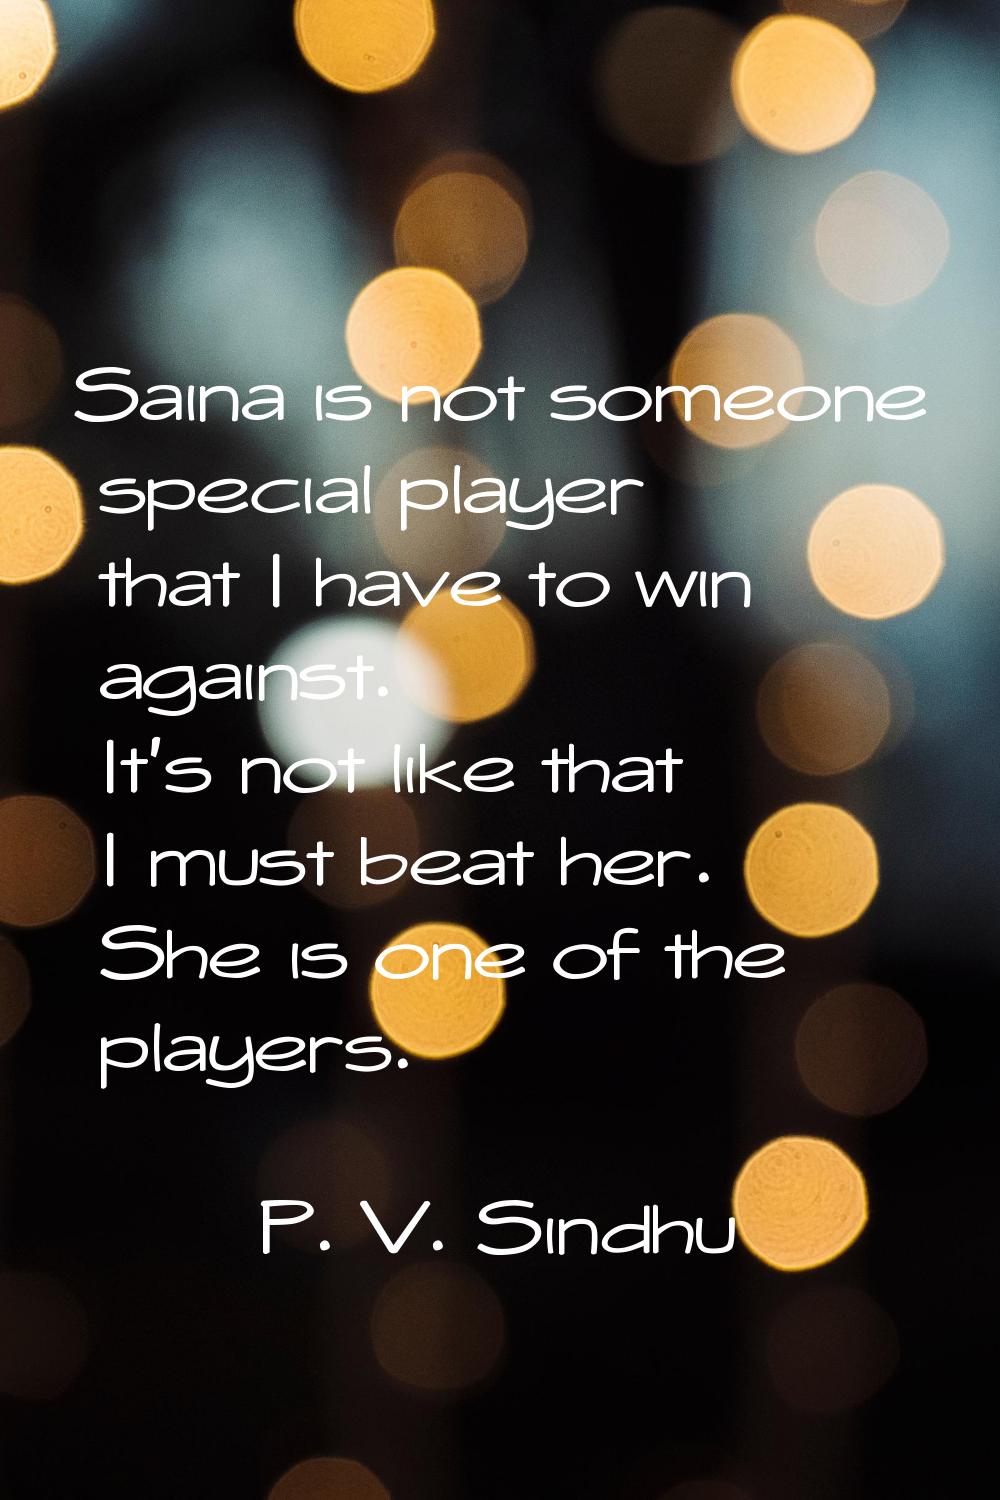 Saina is not someone special player that I have to win against. It's not like that I must beat her.